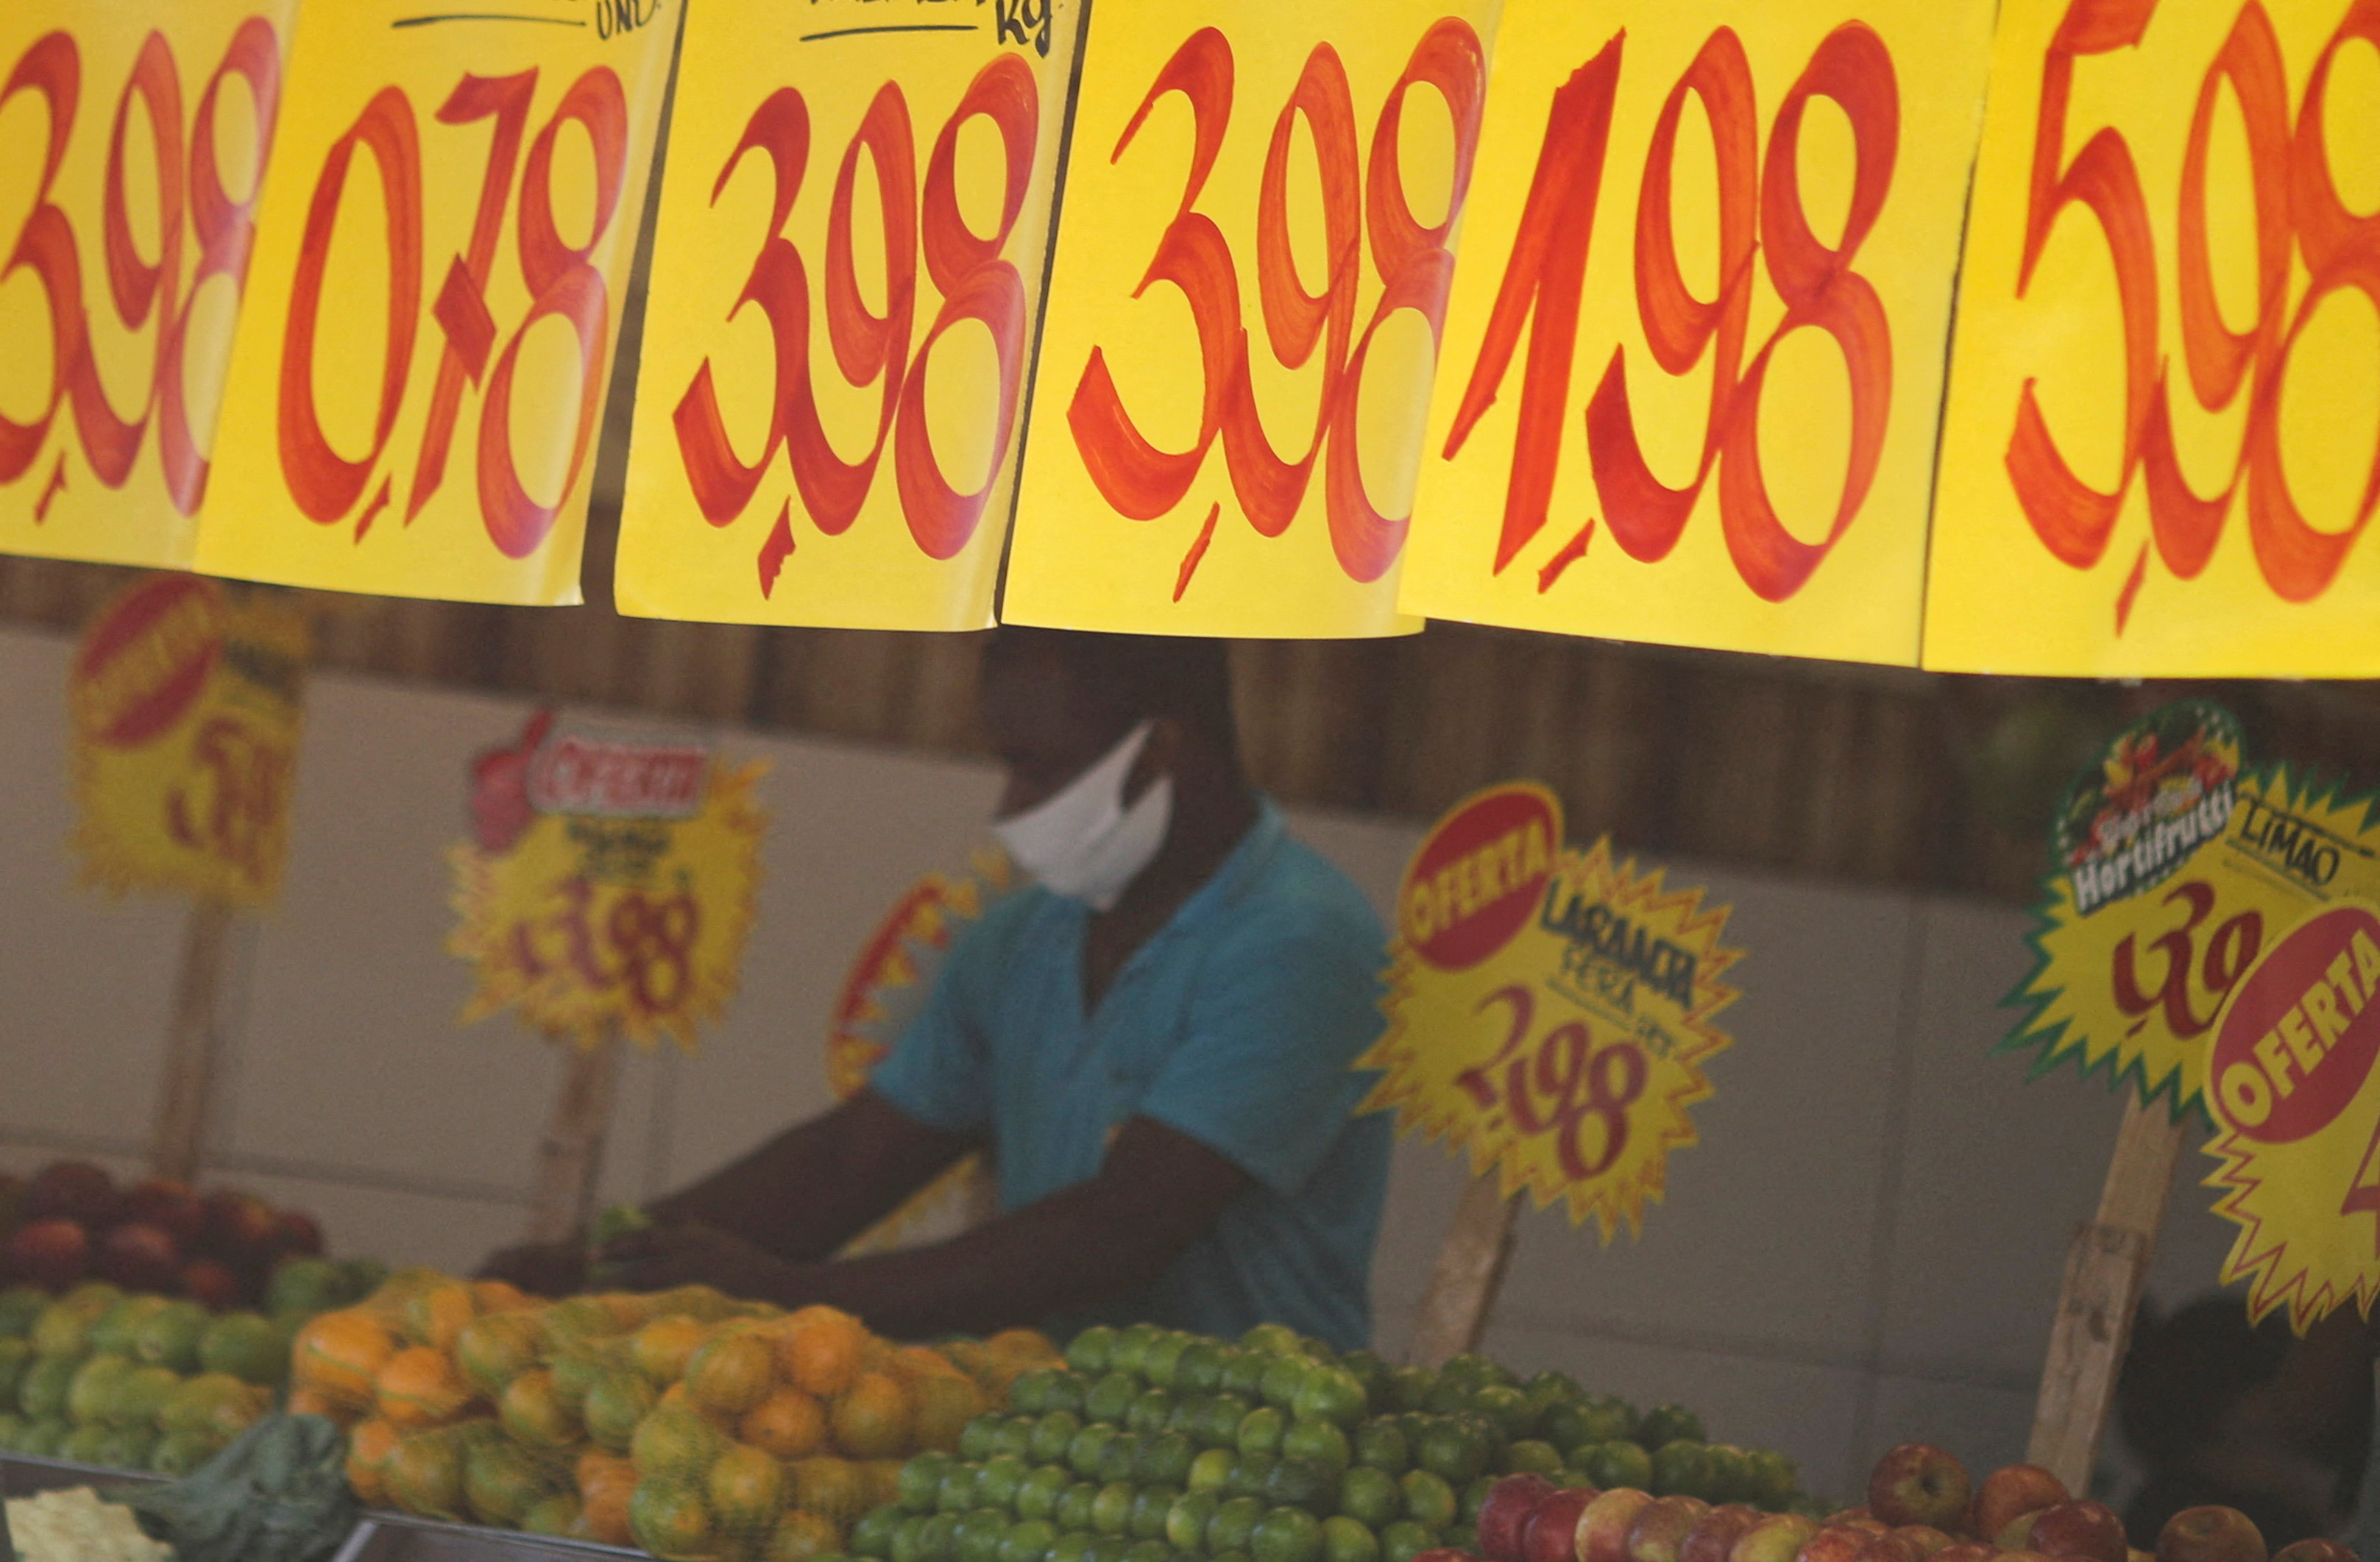 Prices are displayed at a market in Rio de Janeiro